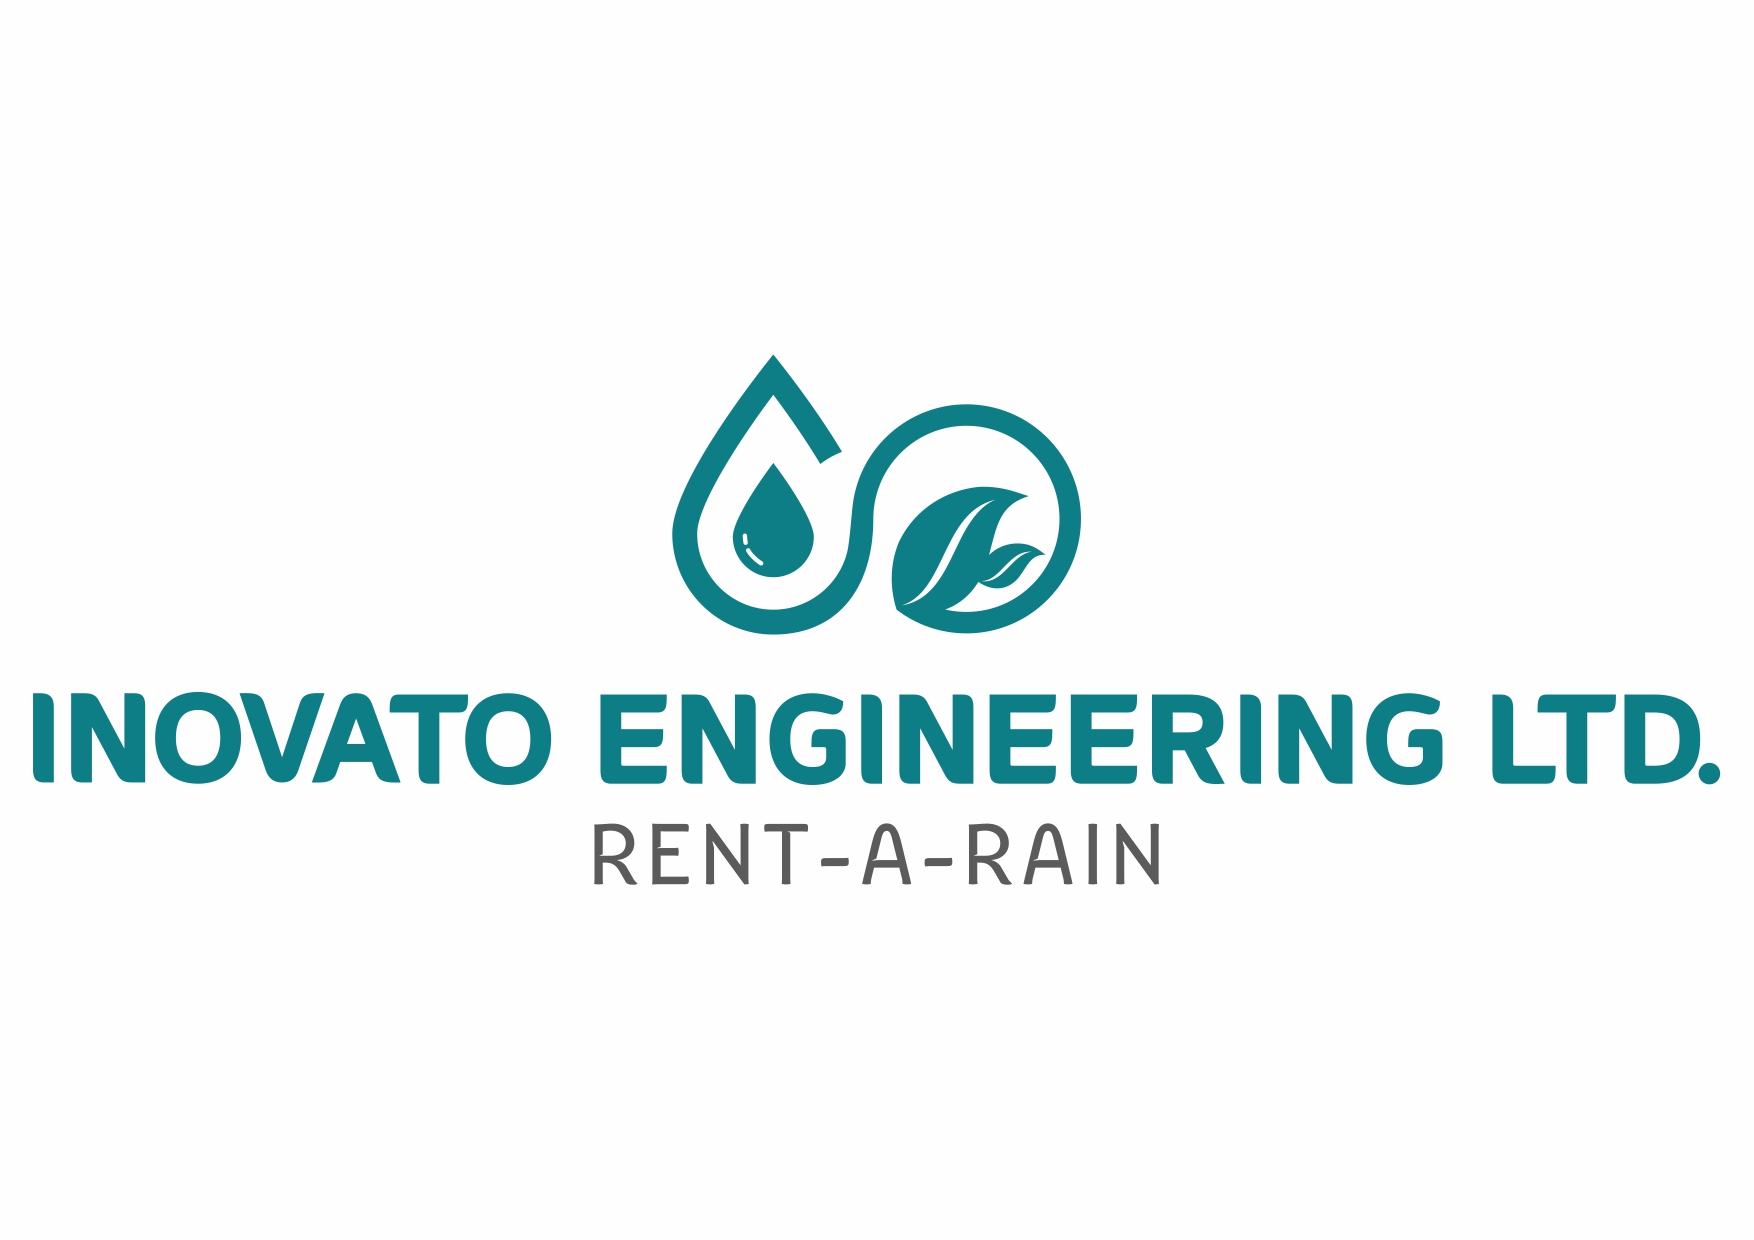 Inovato just became member of the EIA